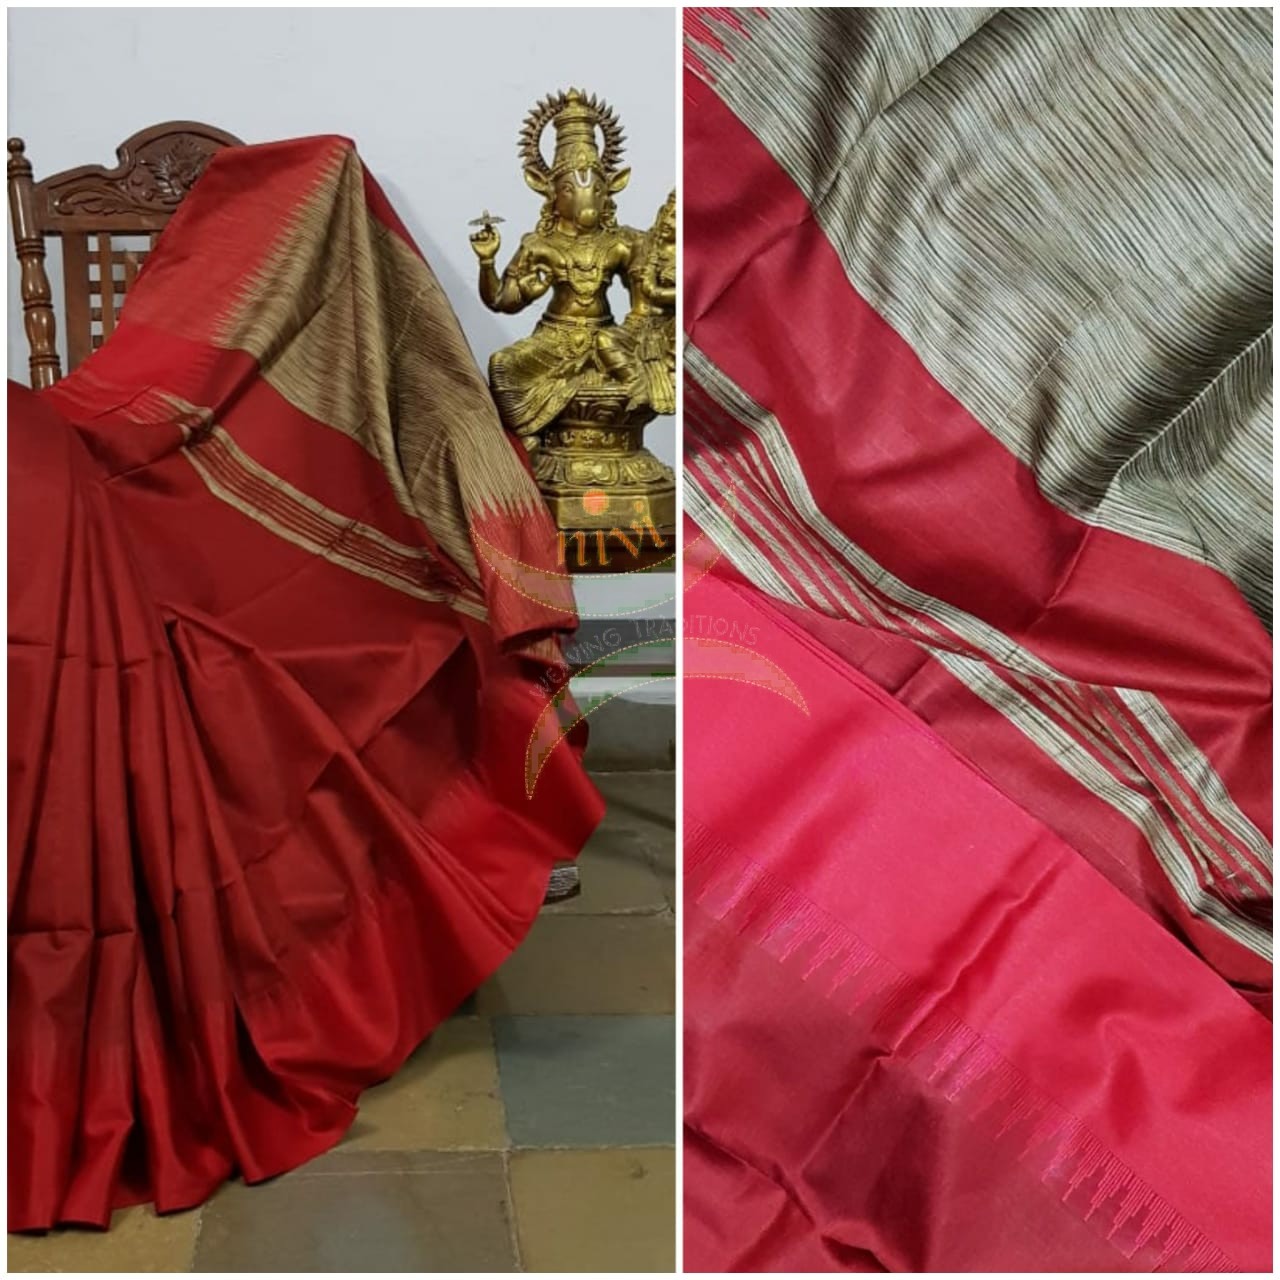 Red Bengal handloom tussar with geecha pallu in contrasting vintage gold colour and red temple border.